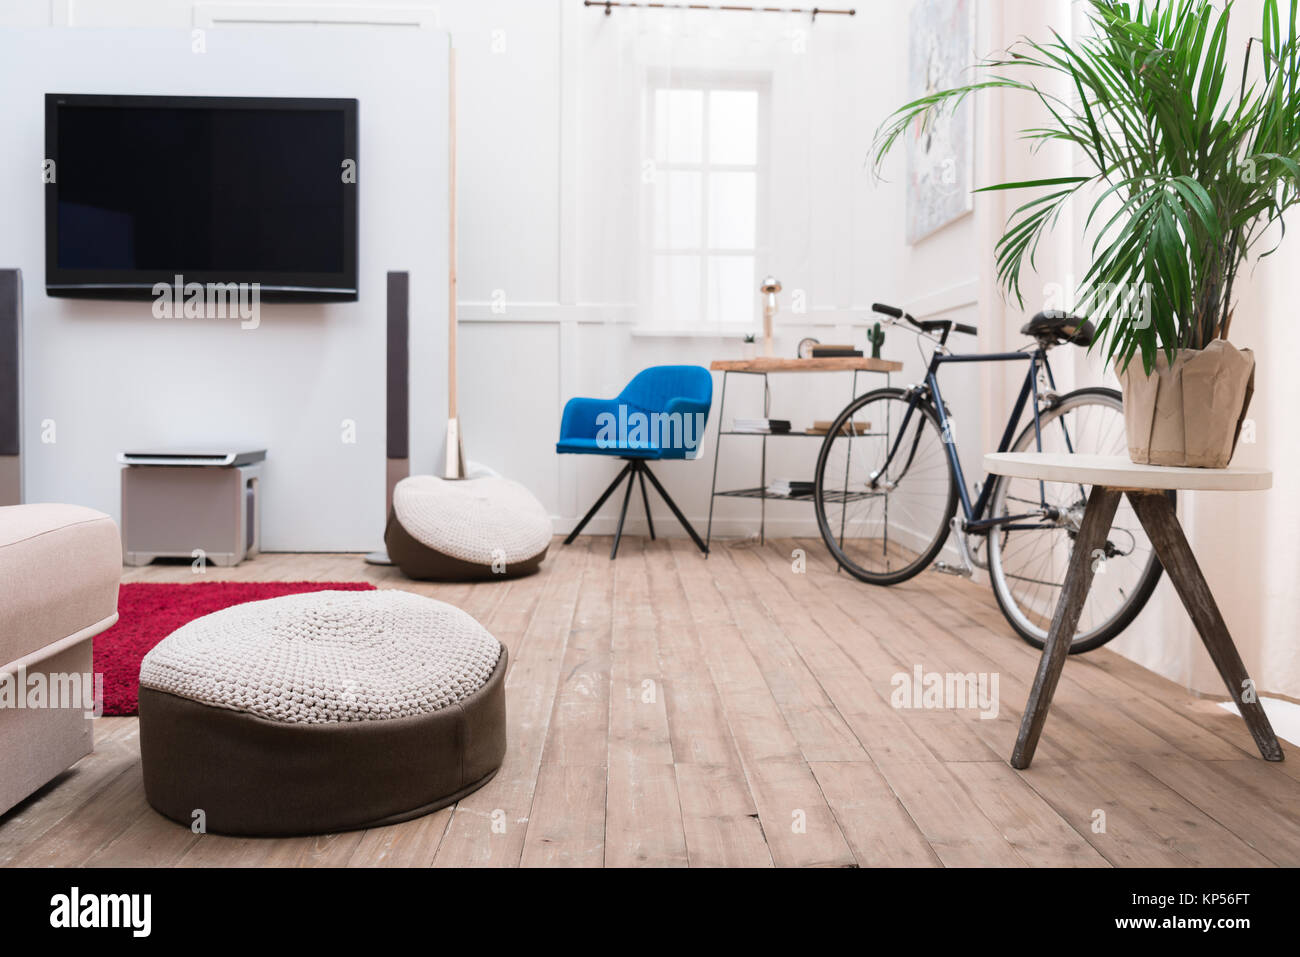 Interior of living room with TV and bicycle Stock Photo